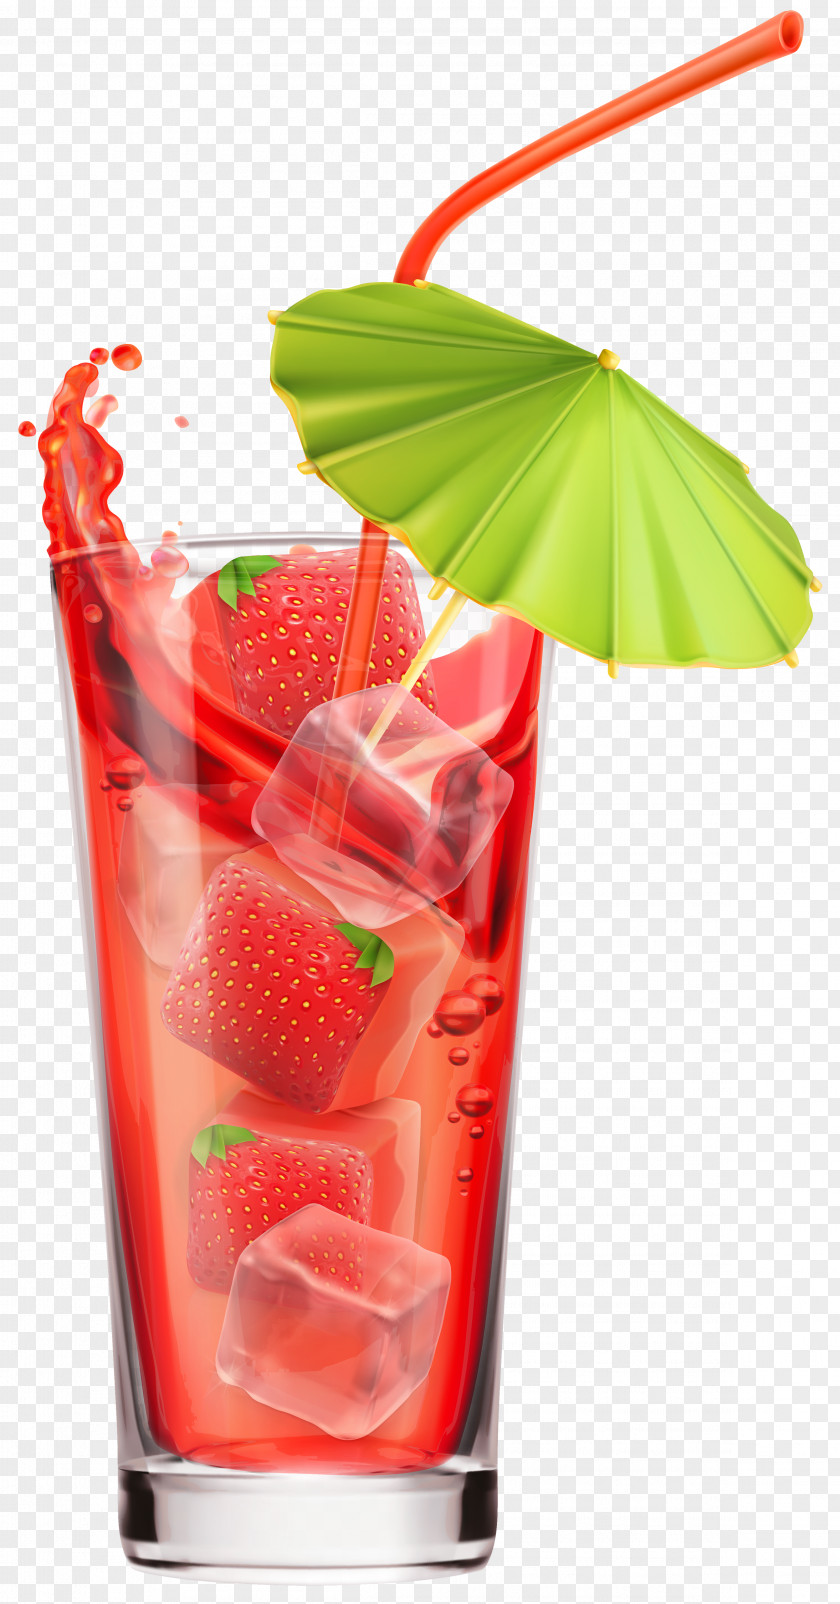 Cocktail Screwdriver Tequila Sunrise Punch Non-alcoholic Drink PNG